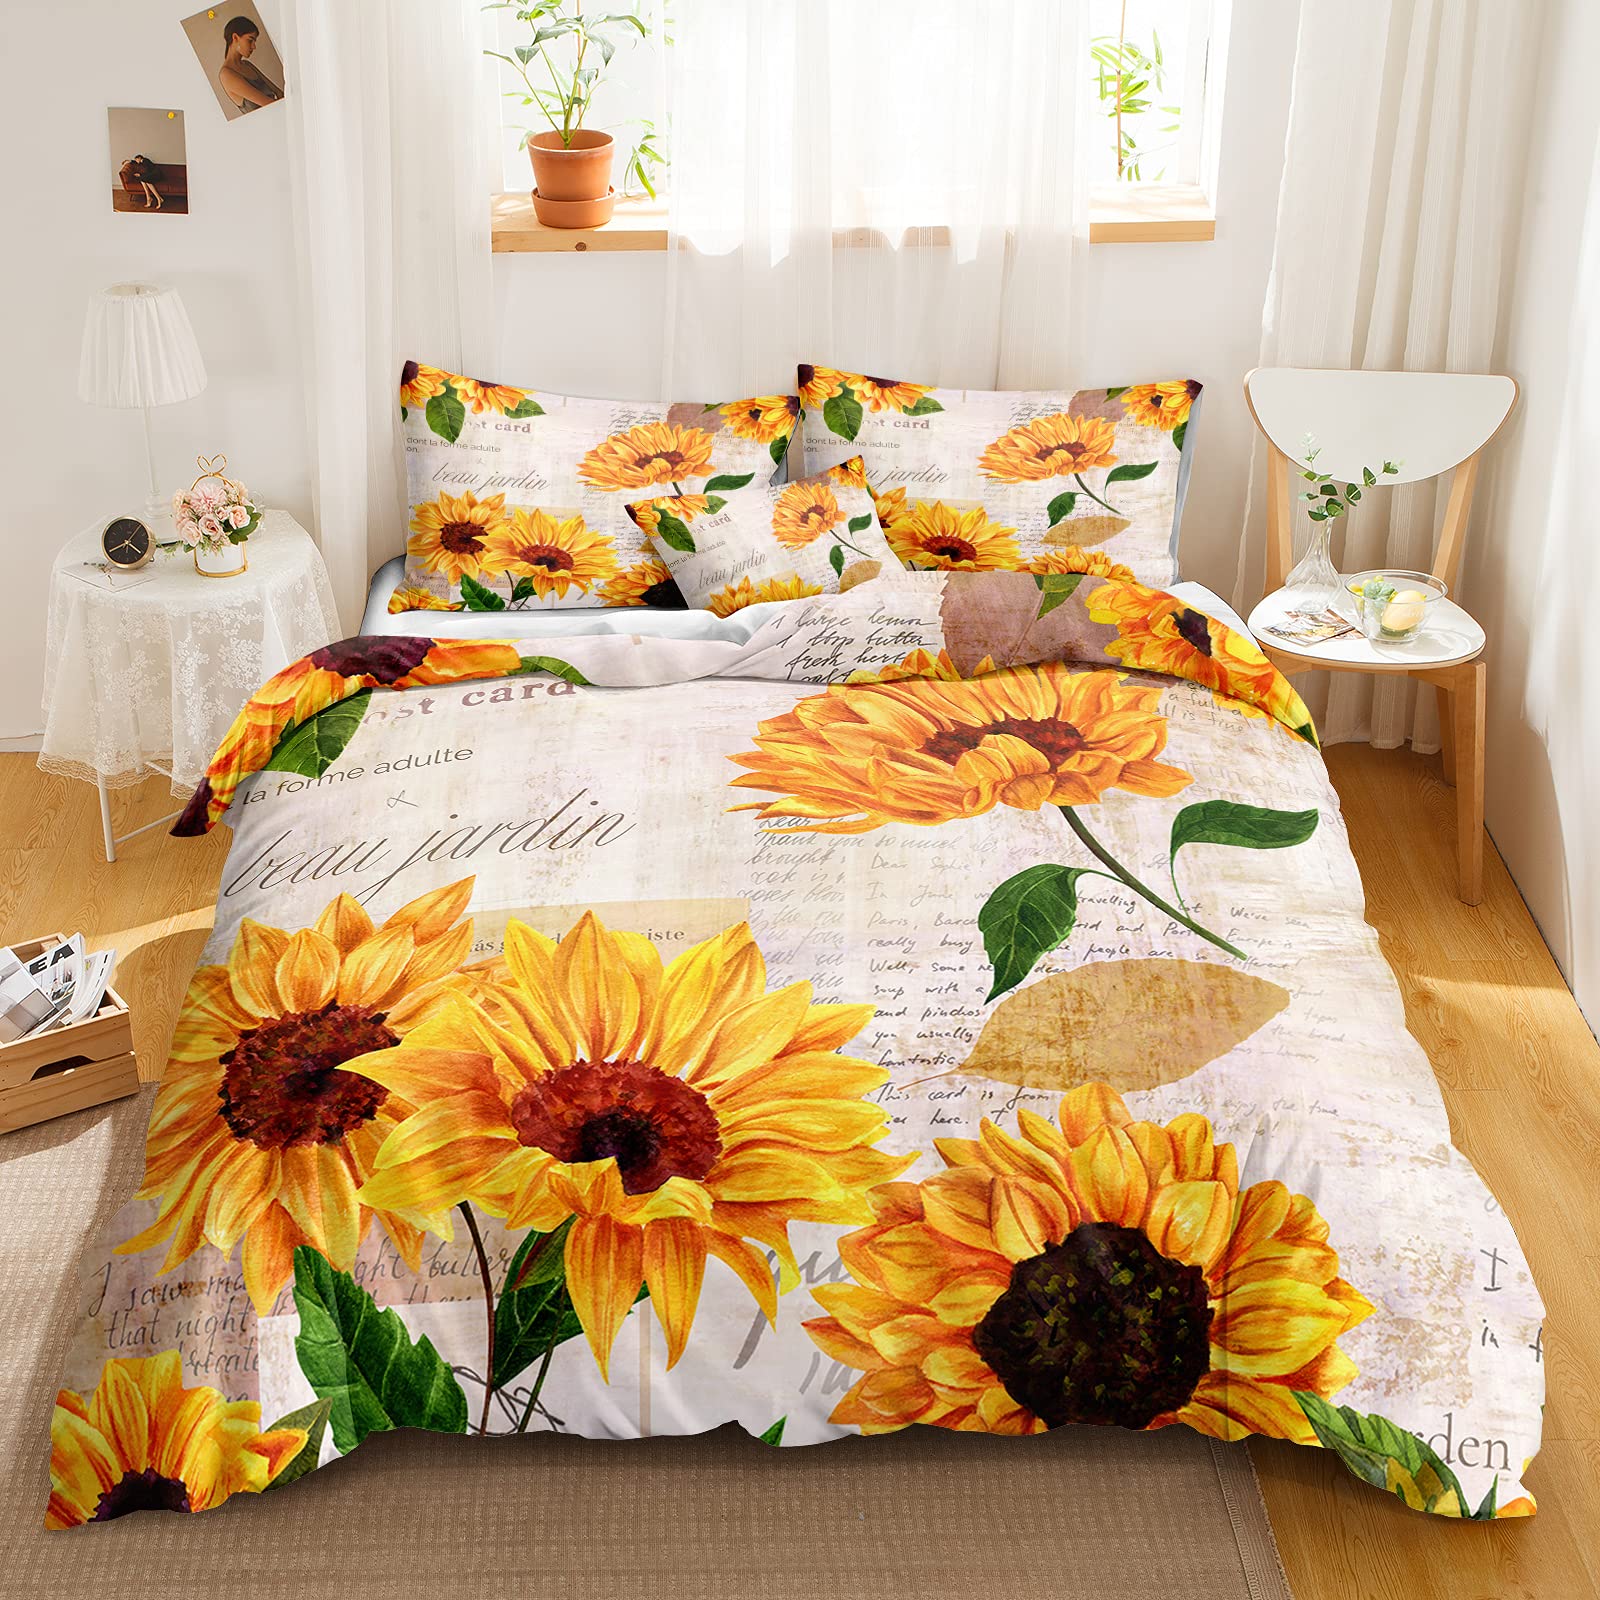 Vintage Sunflowers Bedding Letters Duvet Cover Set Letters and Sunflowers Printed Retro Boys Girls Bedding Sets Queen 1 Duvet Cover 2 Pillowcases (...